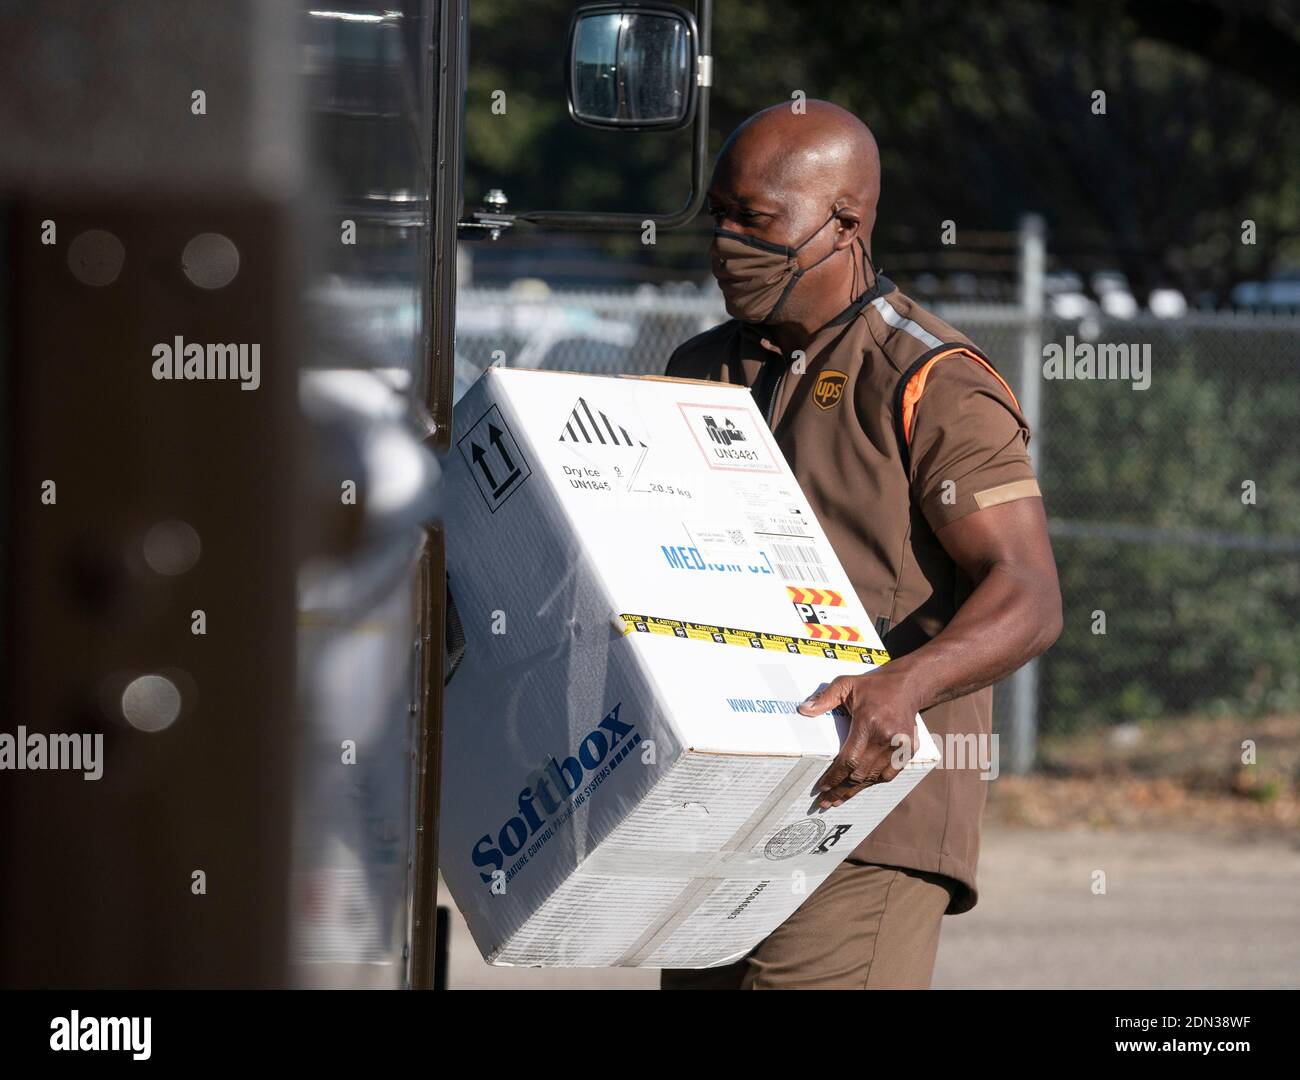 Austin, TX USA December 17, 2020: UPS driver Cornelius Littlejohn carries a box with 5,000 doses of vaccine during a press conference at a UPS facility where Texas officials touted the arrival of the state's first shipments of the Pfizer BioNTech anti-coronavirus vaccine. Thousands of Texans are expected to be vaccinated over the coming days. Credit: Bob Daemmrich/Alamy Live News Stock Photo